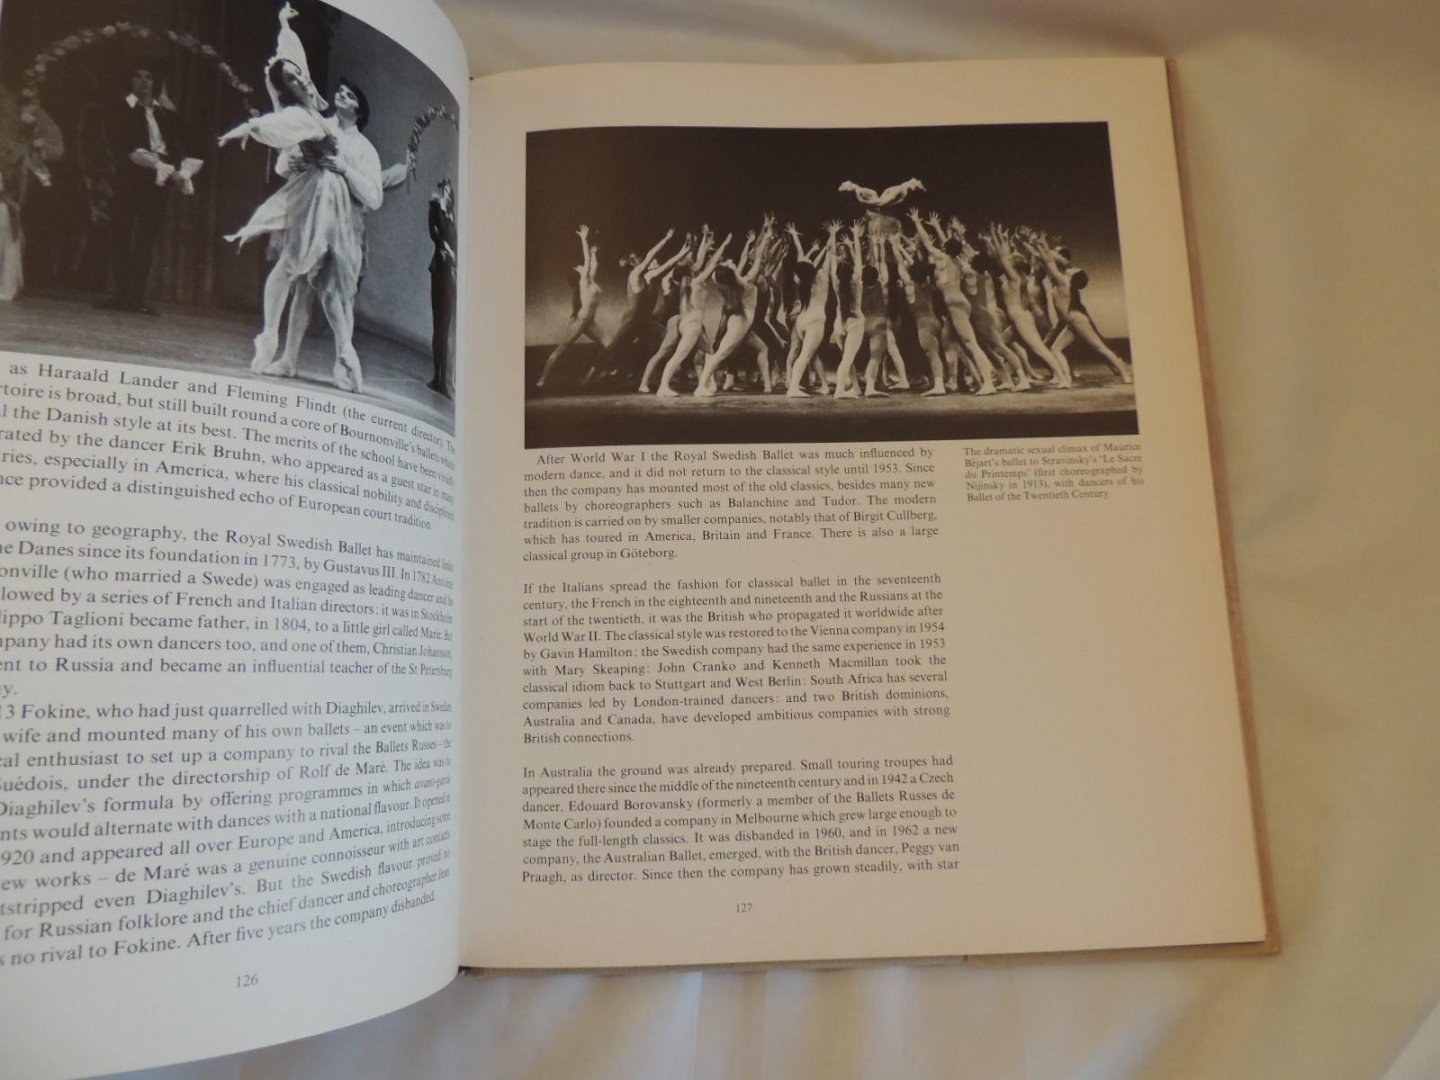 Bland, Alexander - A history of ballet and dance in the Western World